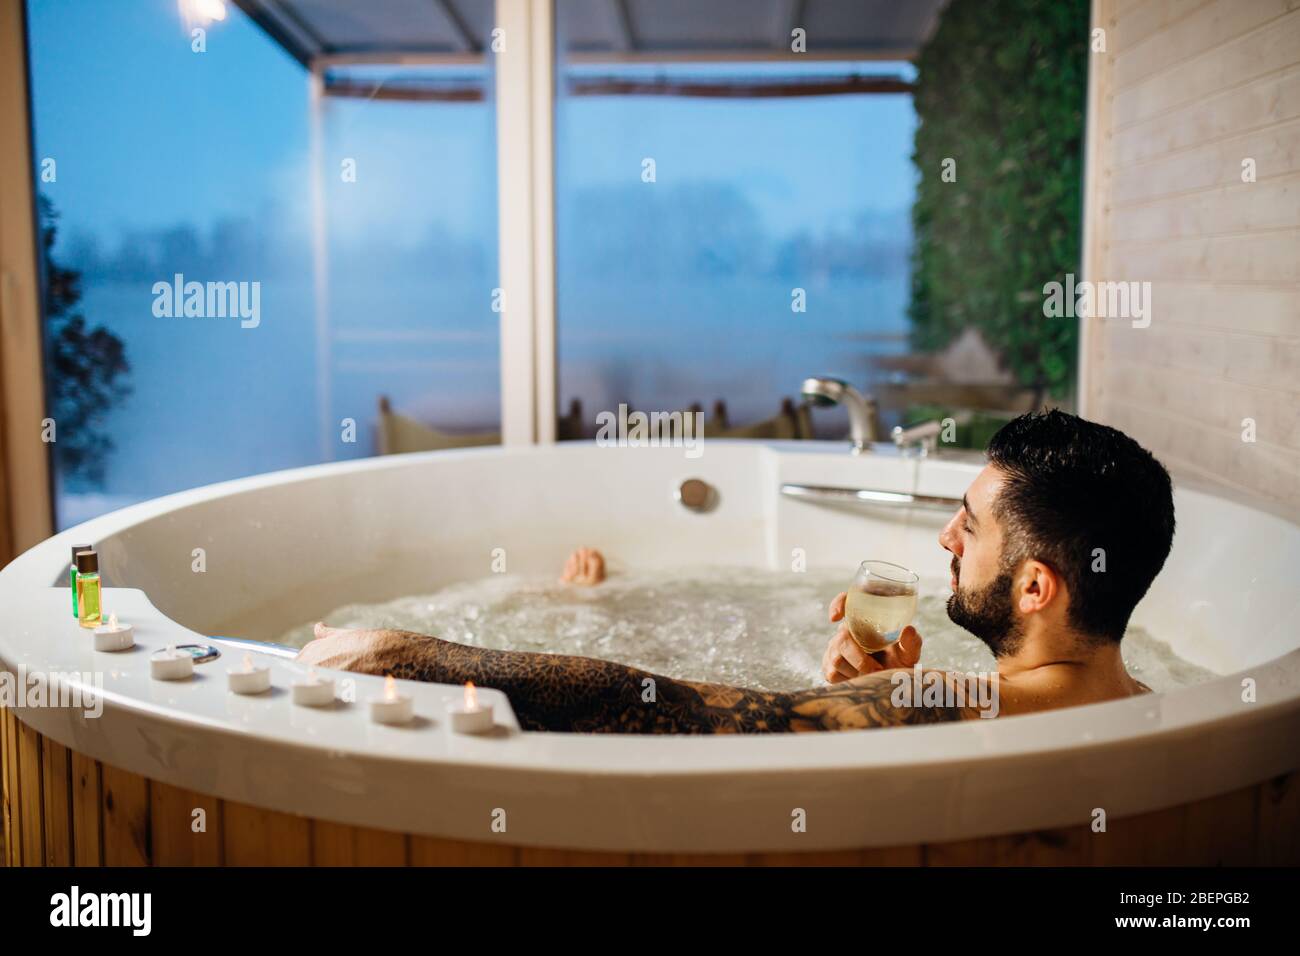 Man relaxing at home in the hot tub bath ritual with a glass of wine.Spa day moment in bathroom indoors jacuzzi tub.Leisure activity.Good personal hyg Stock Photo